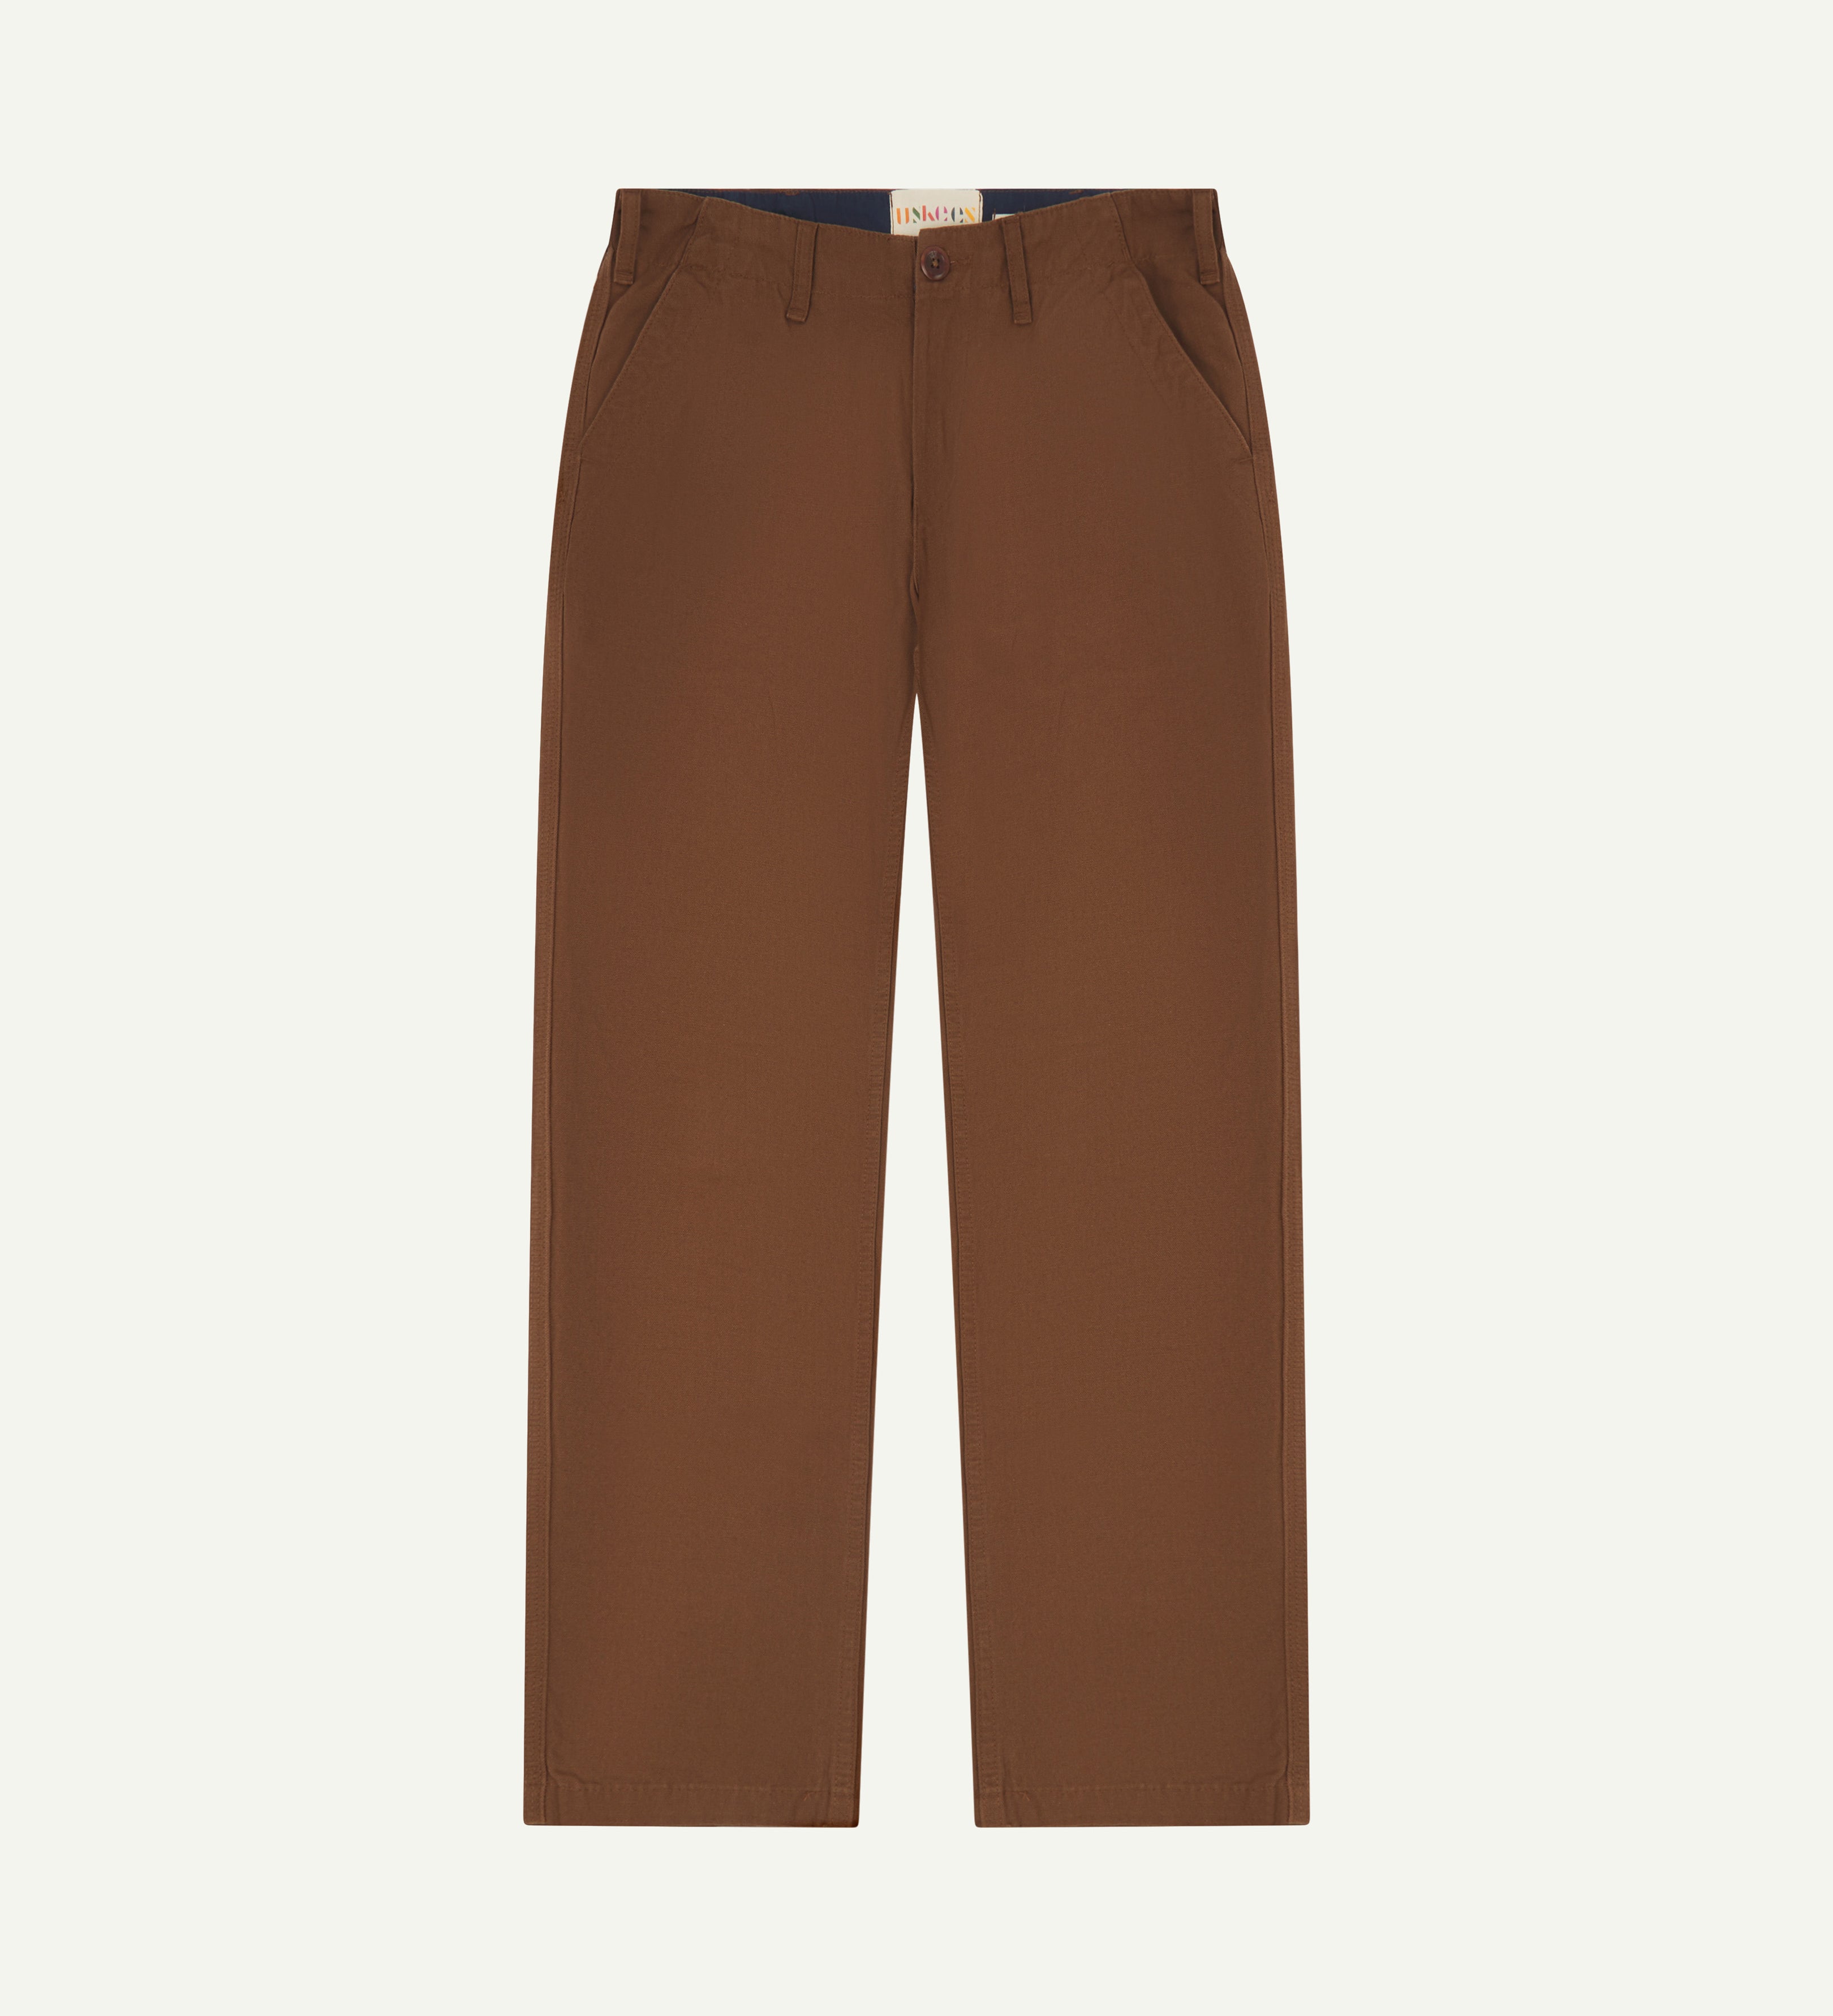 Flat view of #5005 Uskees men's organic cotton 'chocolate' coloured trousers on white background.